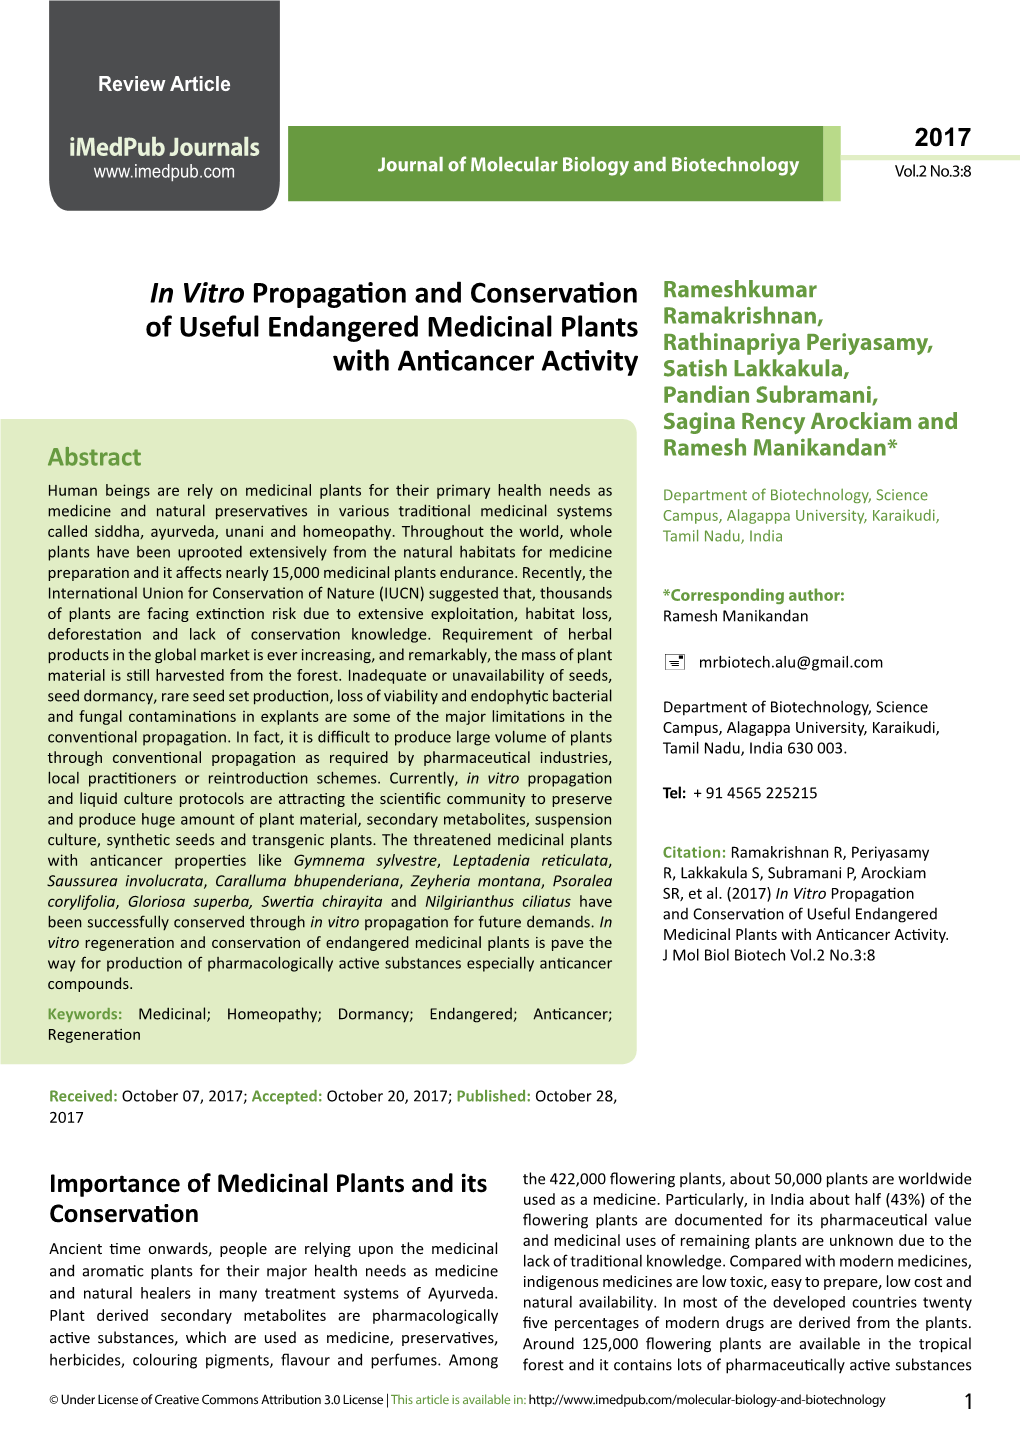 In Vitro Propagation and Conservation of Useful Endangered Medicinal